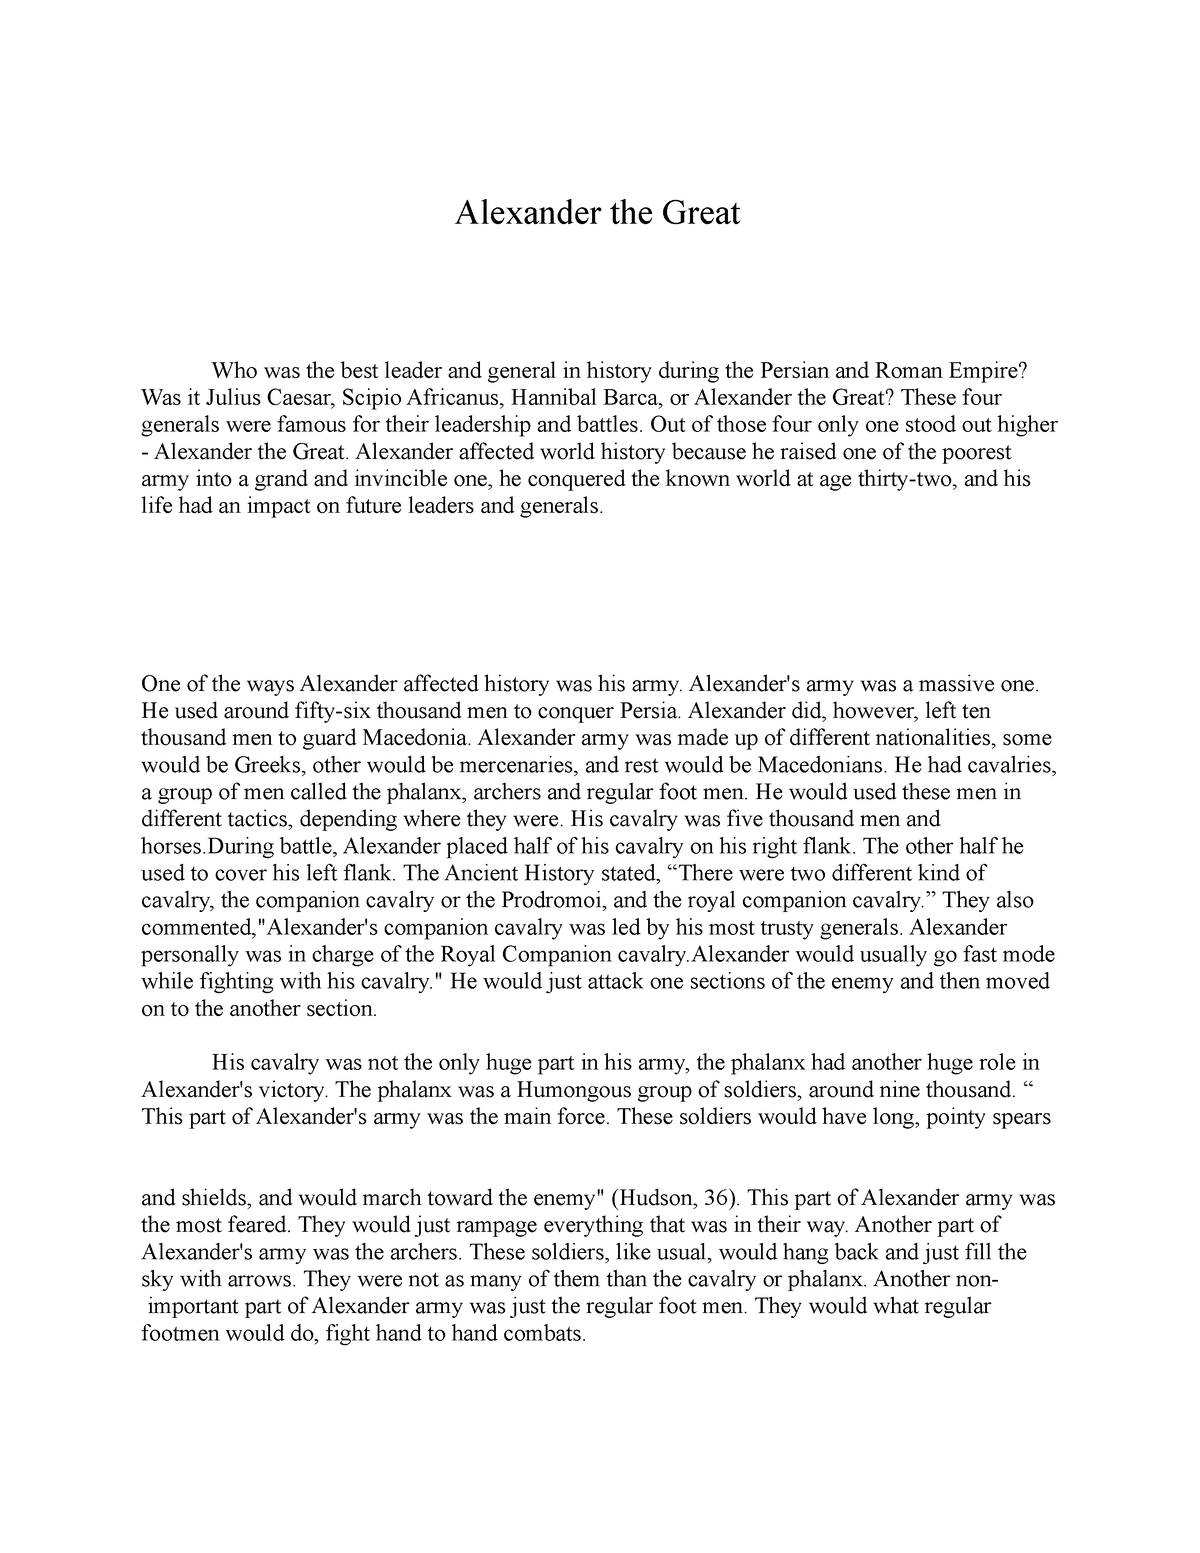 research paper on alexander the great